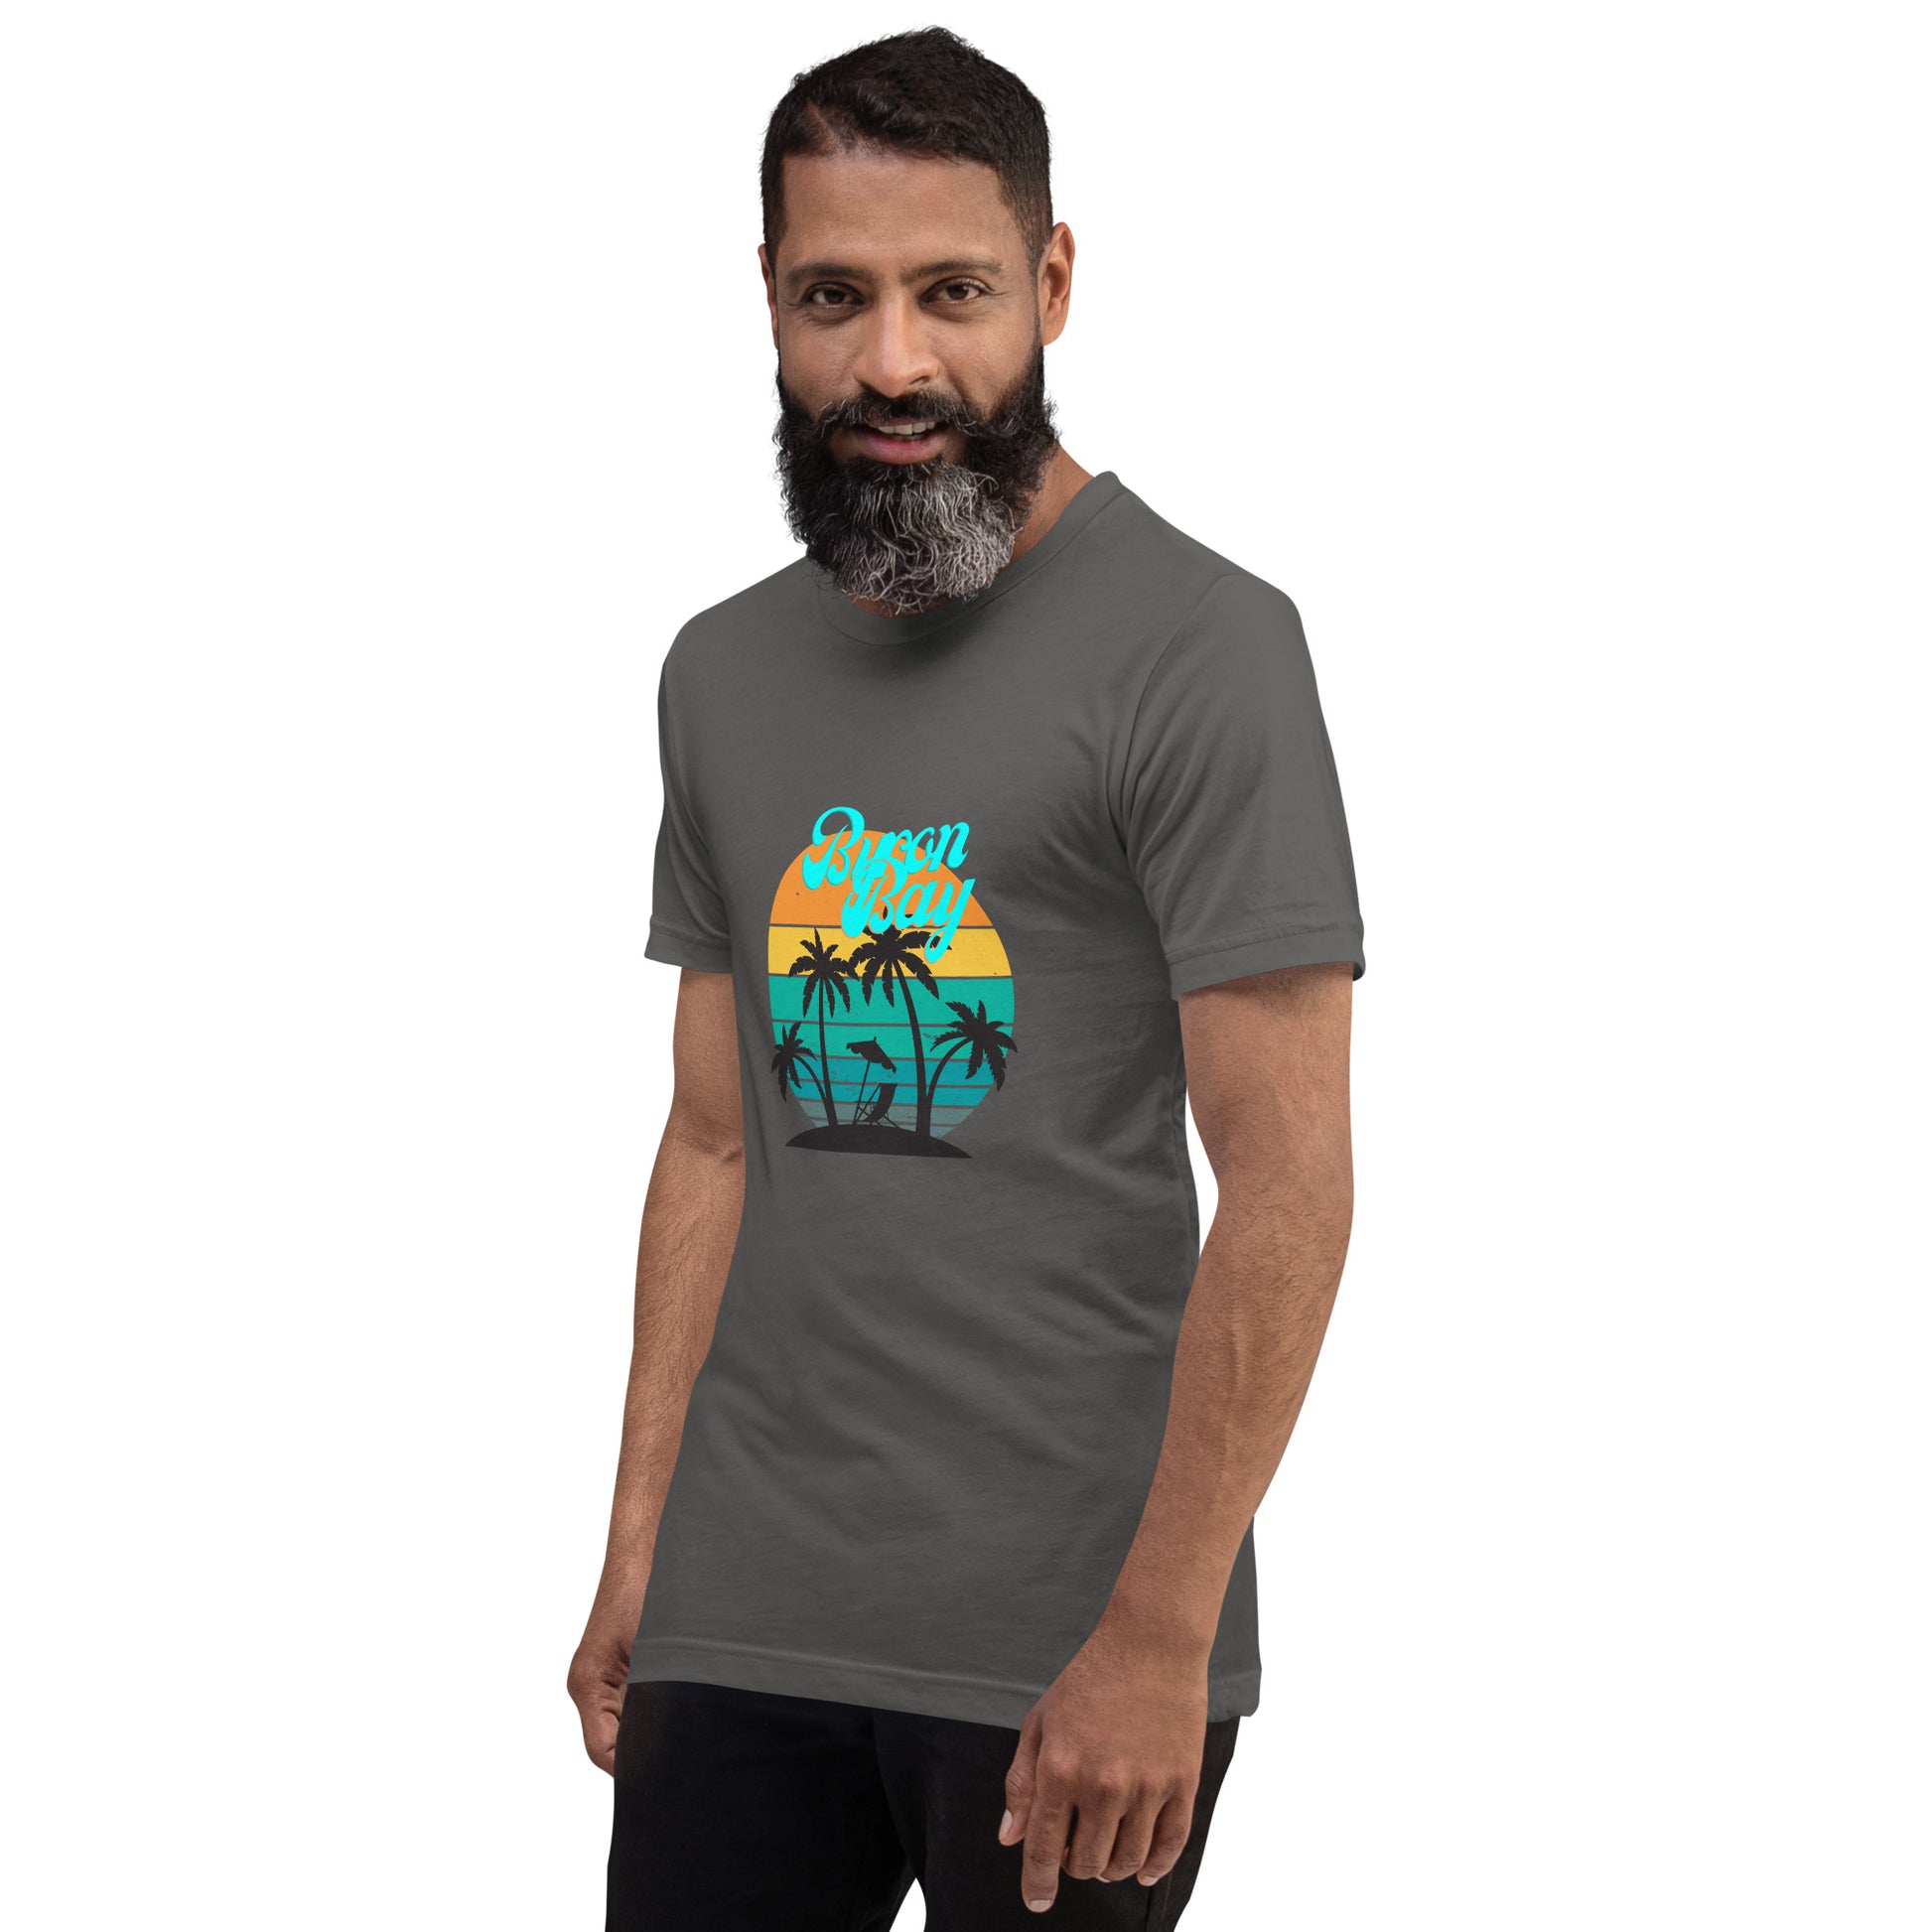  Unisex T-Shirt - Asphalt  - Front view, on man standing with arms by side - Byron Bay design on front - Genuine Byron Bay Merchandise | Produced by Go Sea Kayak Byron Bay 